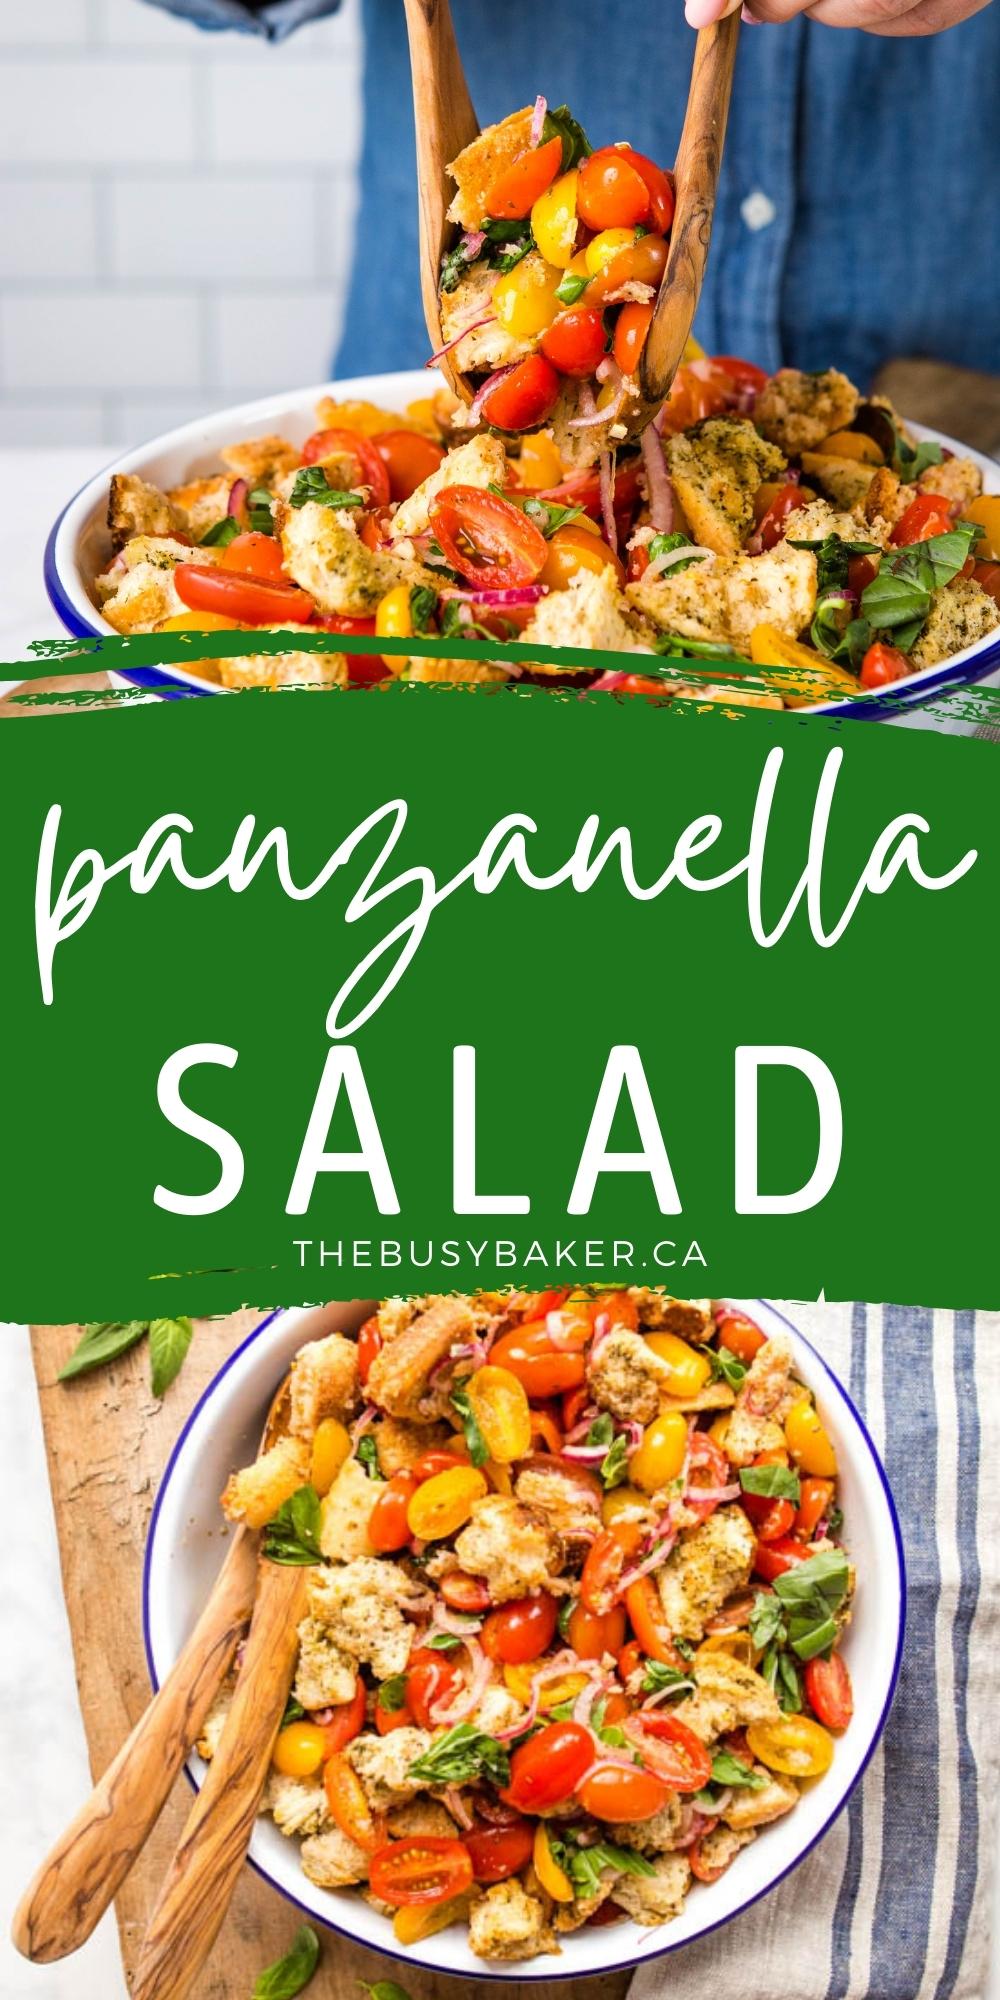 This Panzanella Salad is the perfect fresh, flavourful and filling salad made in the classic Italian way - with toasted bread, juicy tomatoes, and fresh herbs! Recipe from thebusybaker.ca! #panzanellasalad #italian #breadsalad #salad #healthy #vegetarian #vegan #lunch via @busybakerblog